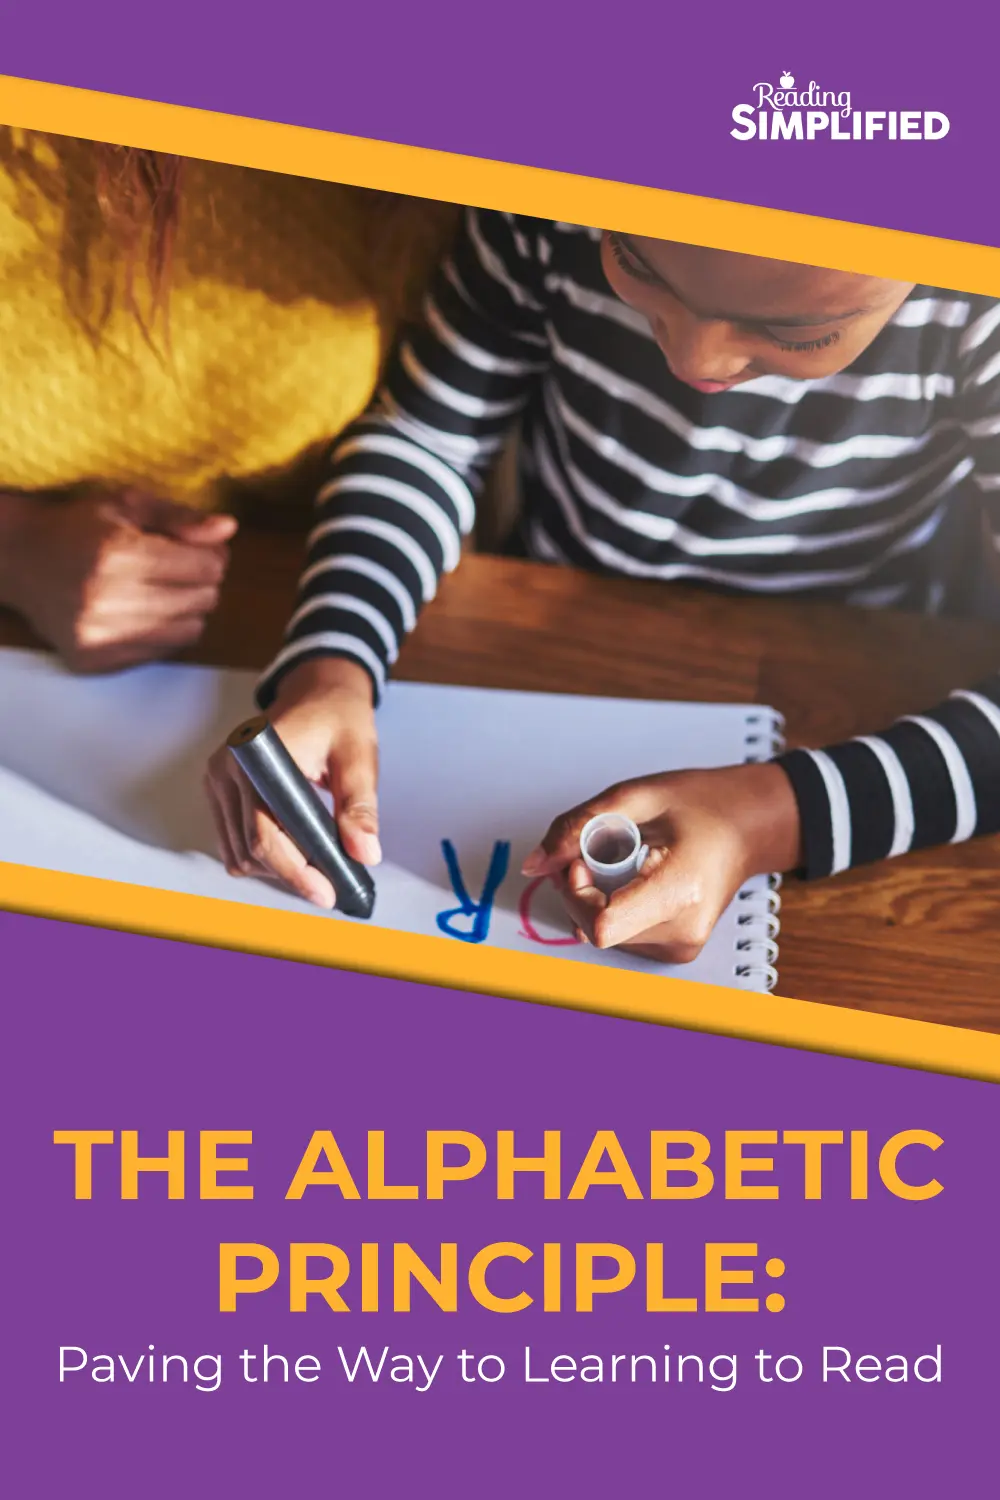 The Alphabetic Principle: Paving the Way to Learning to Read, child writing letters on paper